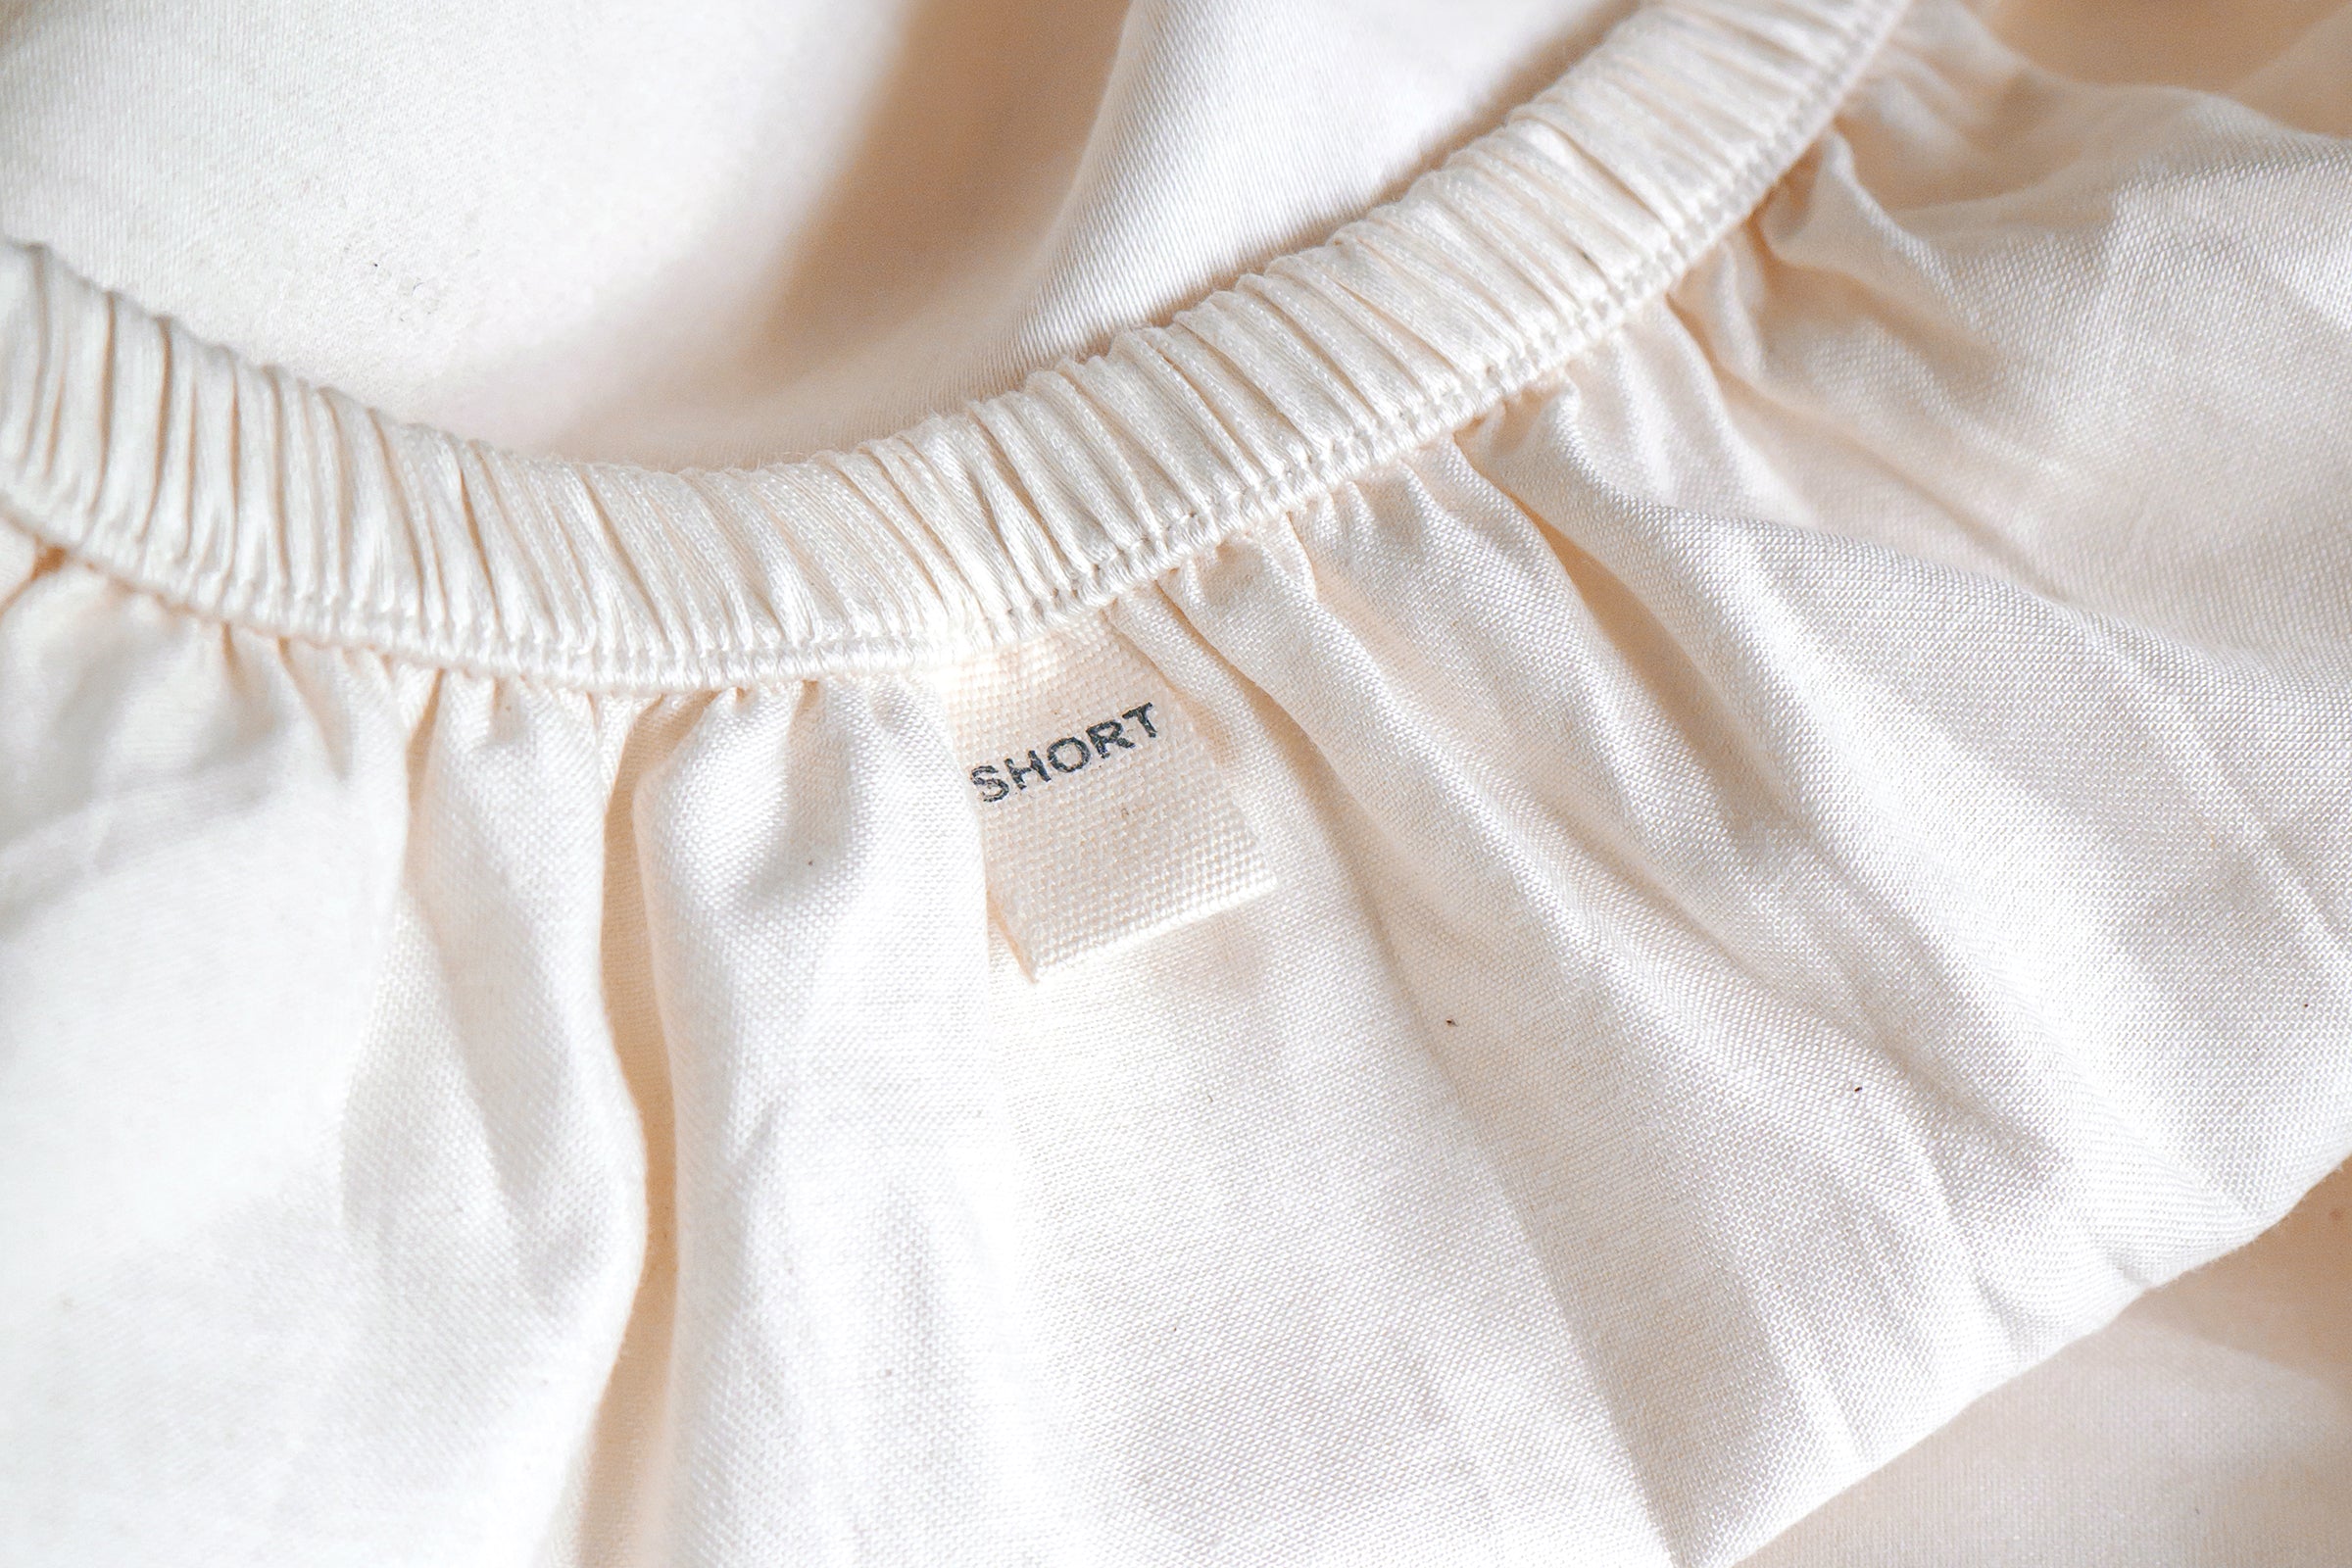 white-organic-classic-baby-cot-fitted-sheet-close-up-shot-of-short-label-by-sojao.jpg